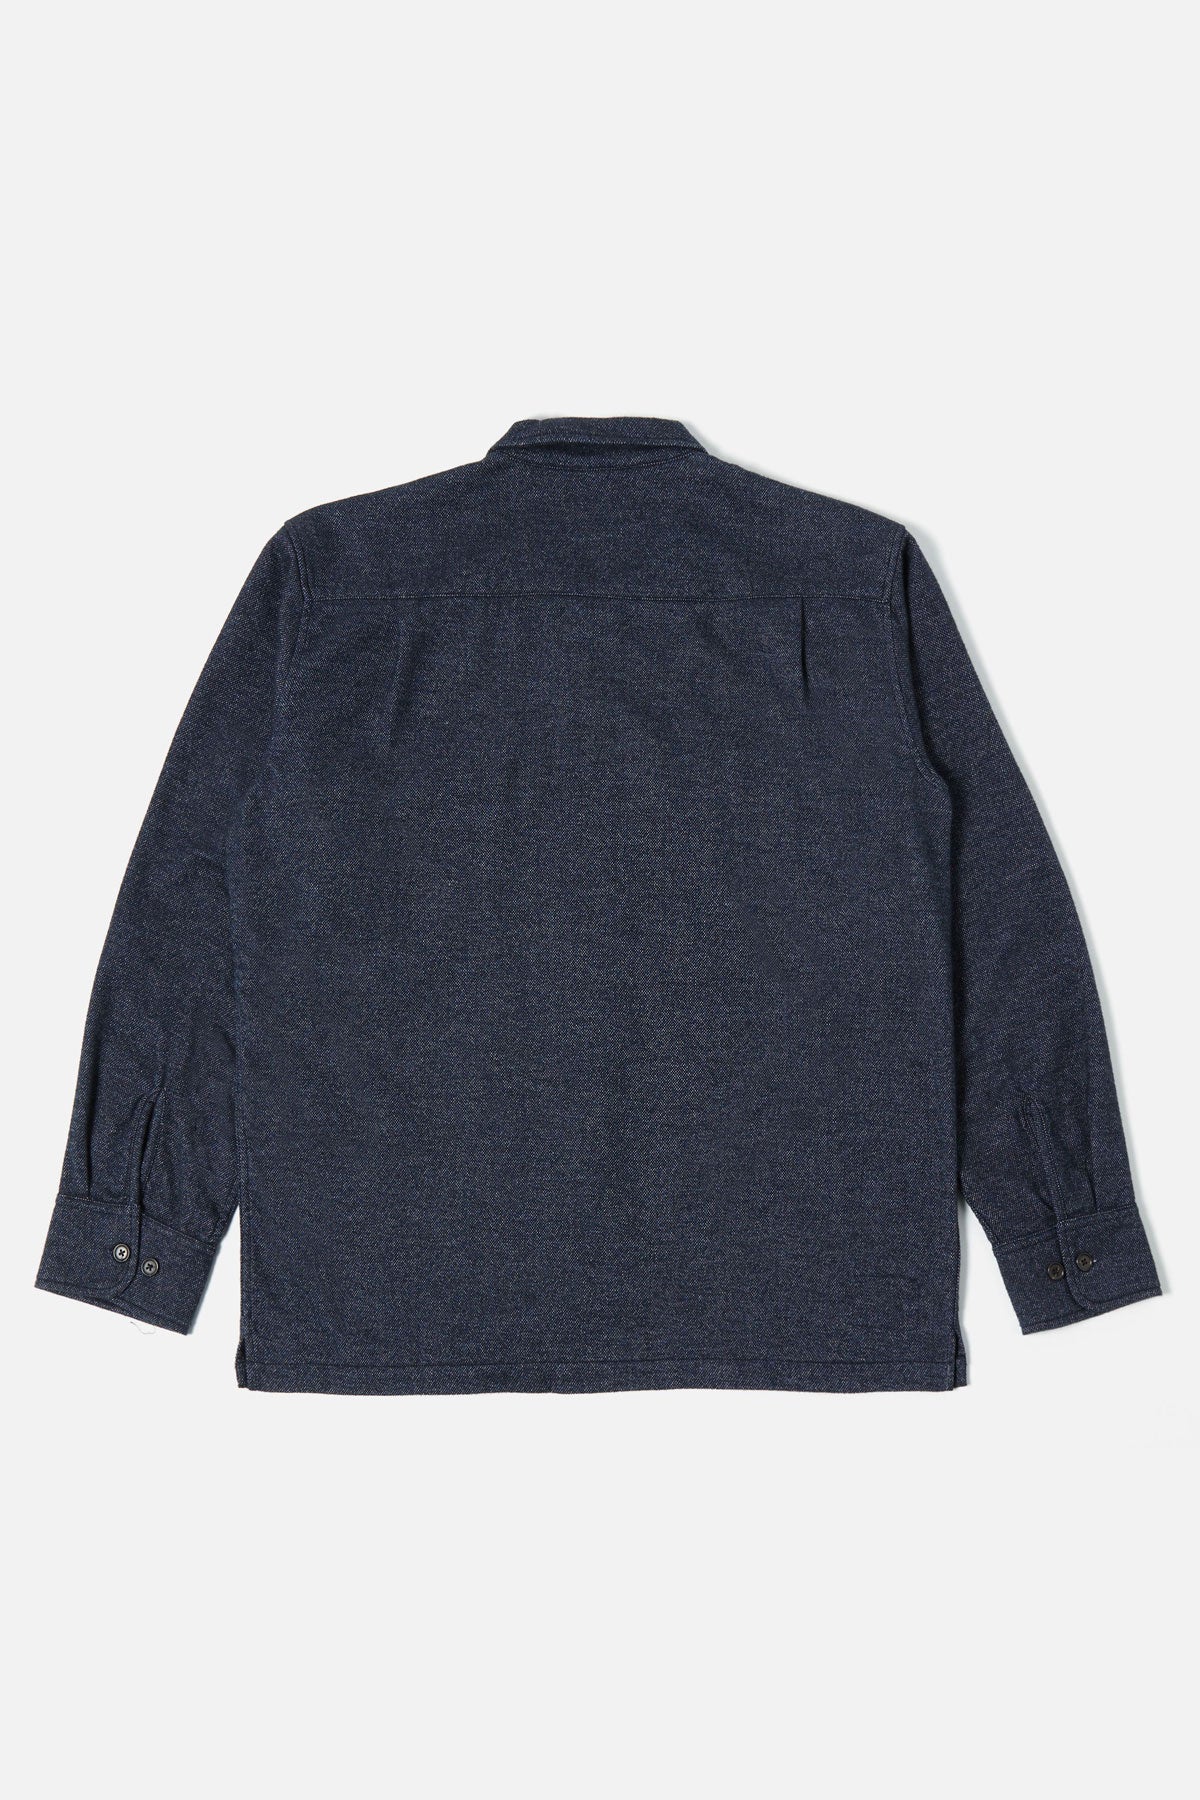 Universal Works - Soft Flannel Utility Shirt in Navy